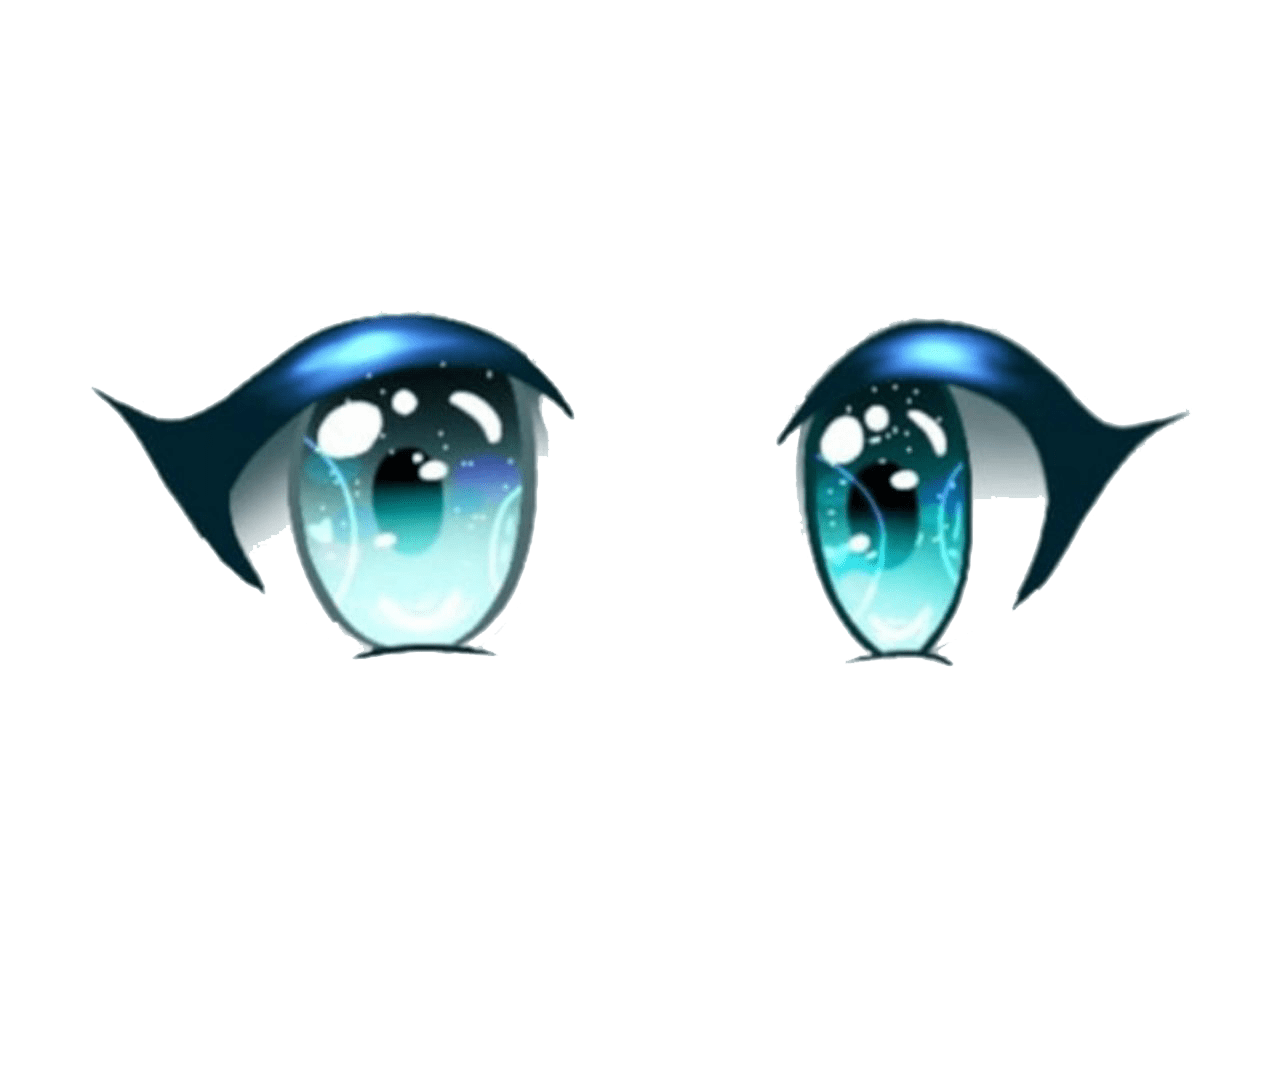 Gacha Life PNG — Clothes, eyes, accessories, hair